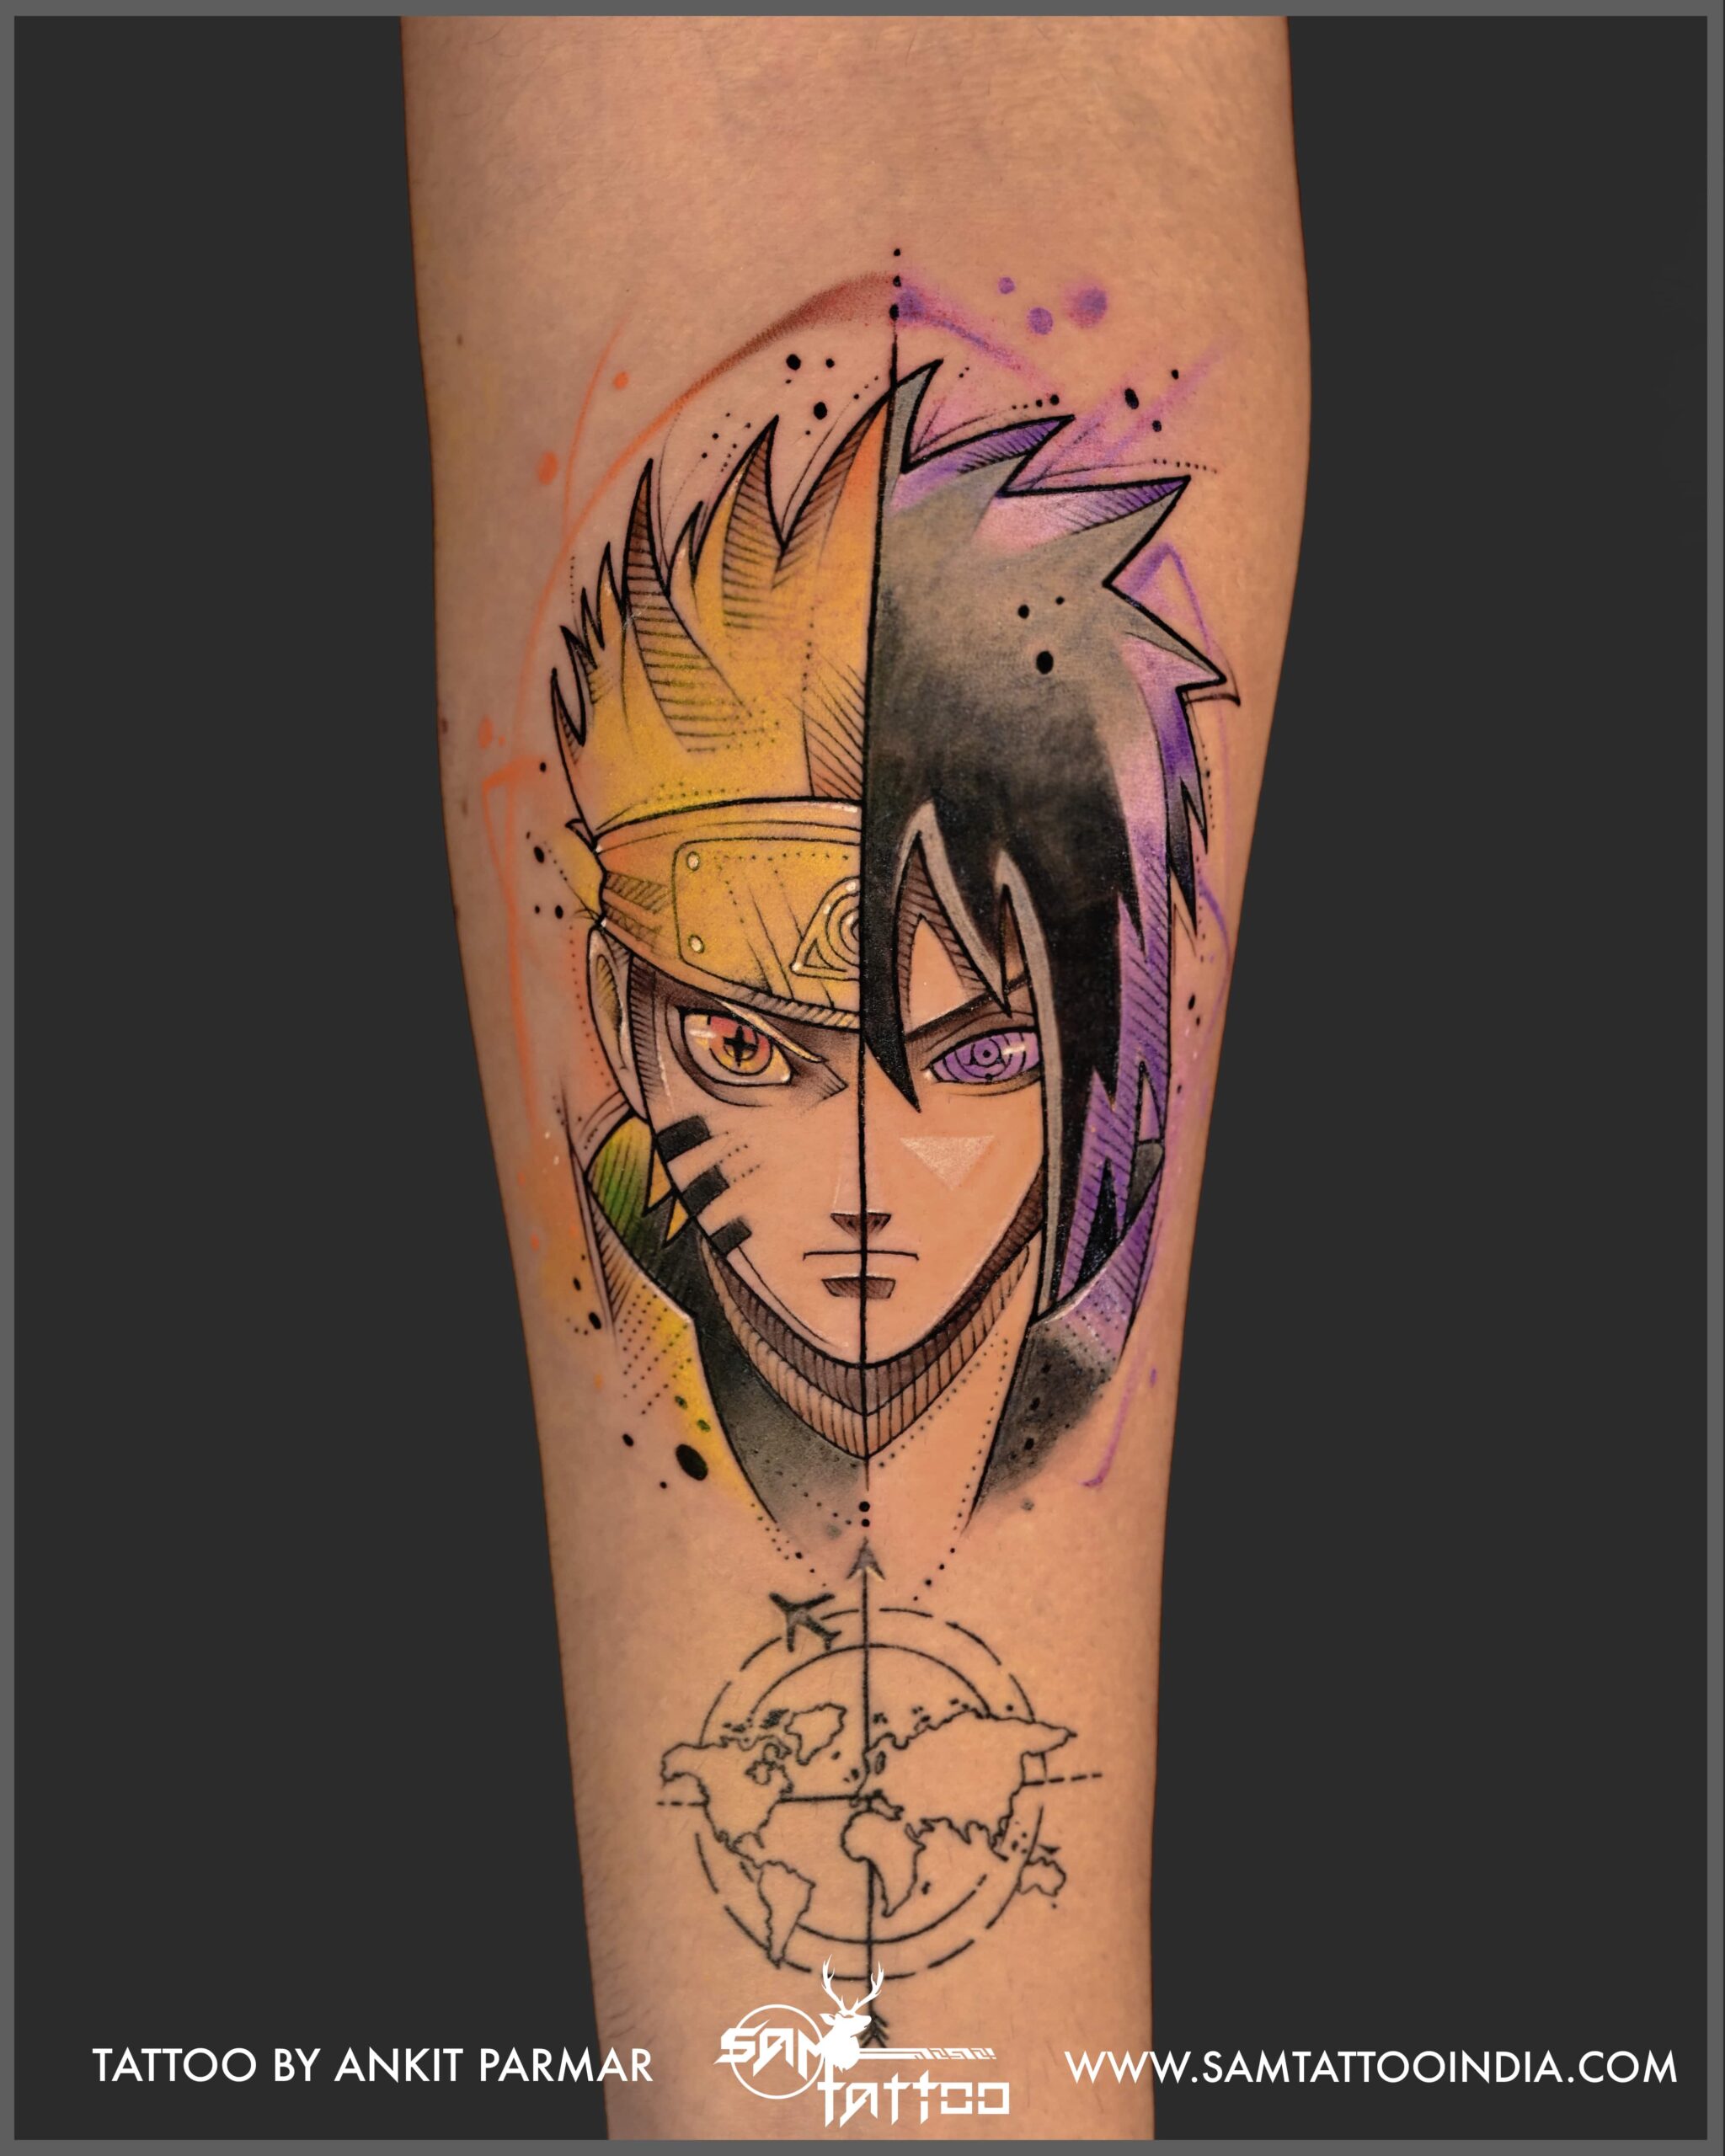 Got my first Anime tattoo of my favorite characters : r/JuJutsuKaisen